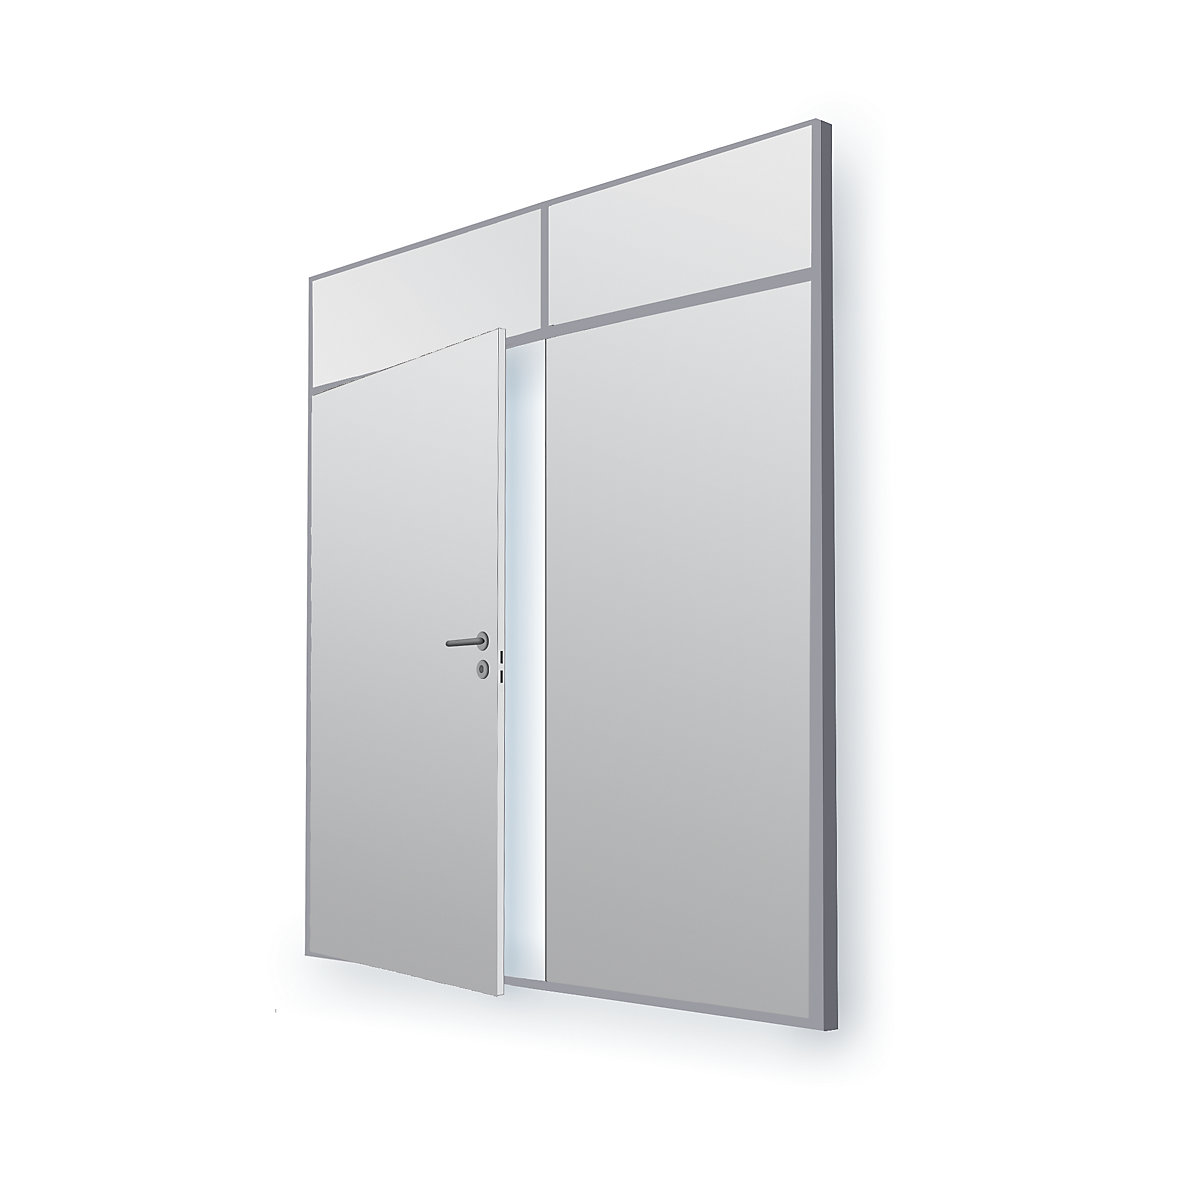 Flexible partition system, wall thickness 82 mm, double door section, HxW 2093 x 1789 mm, without window-8